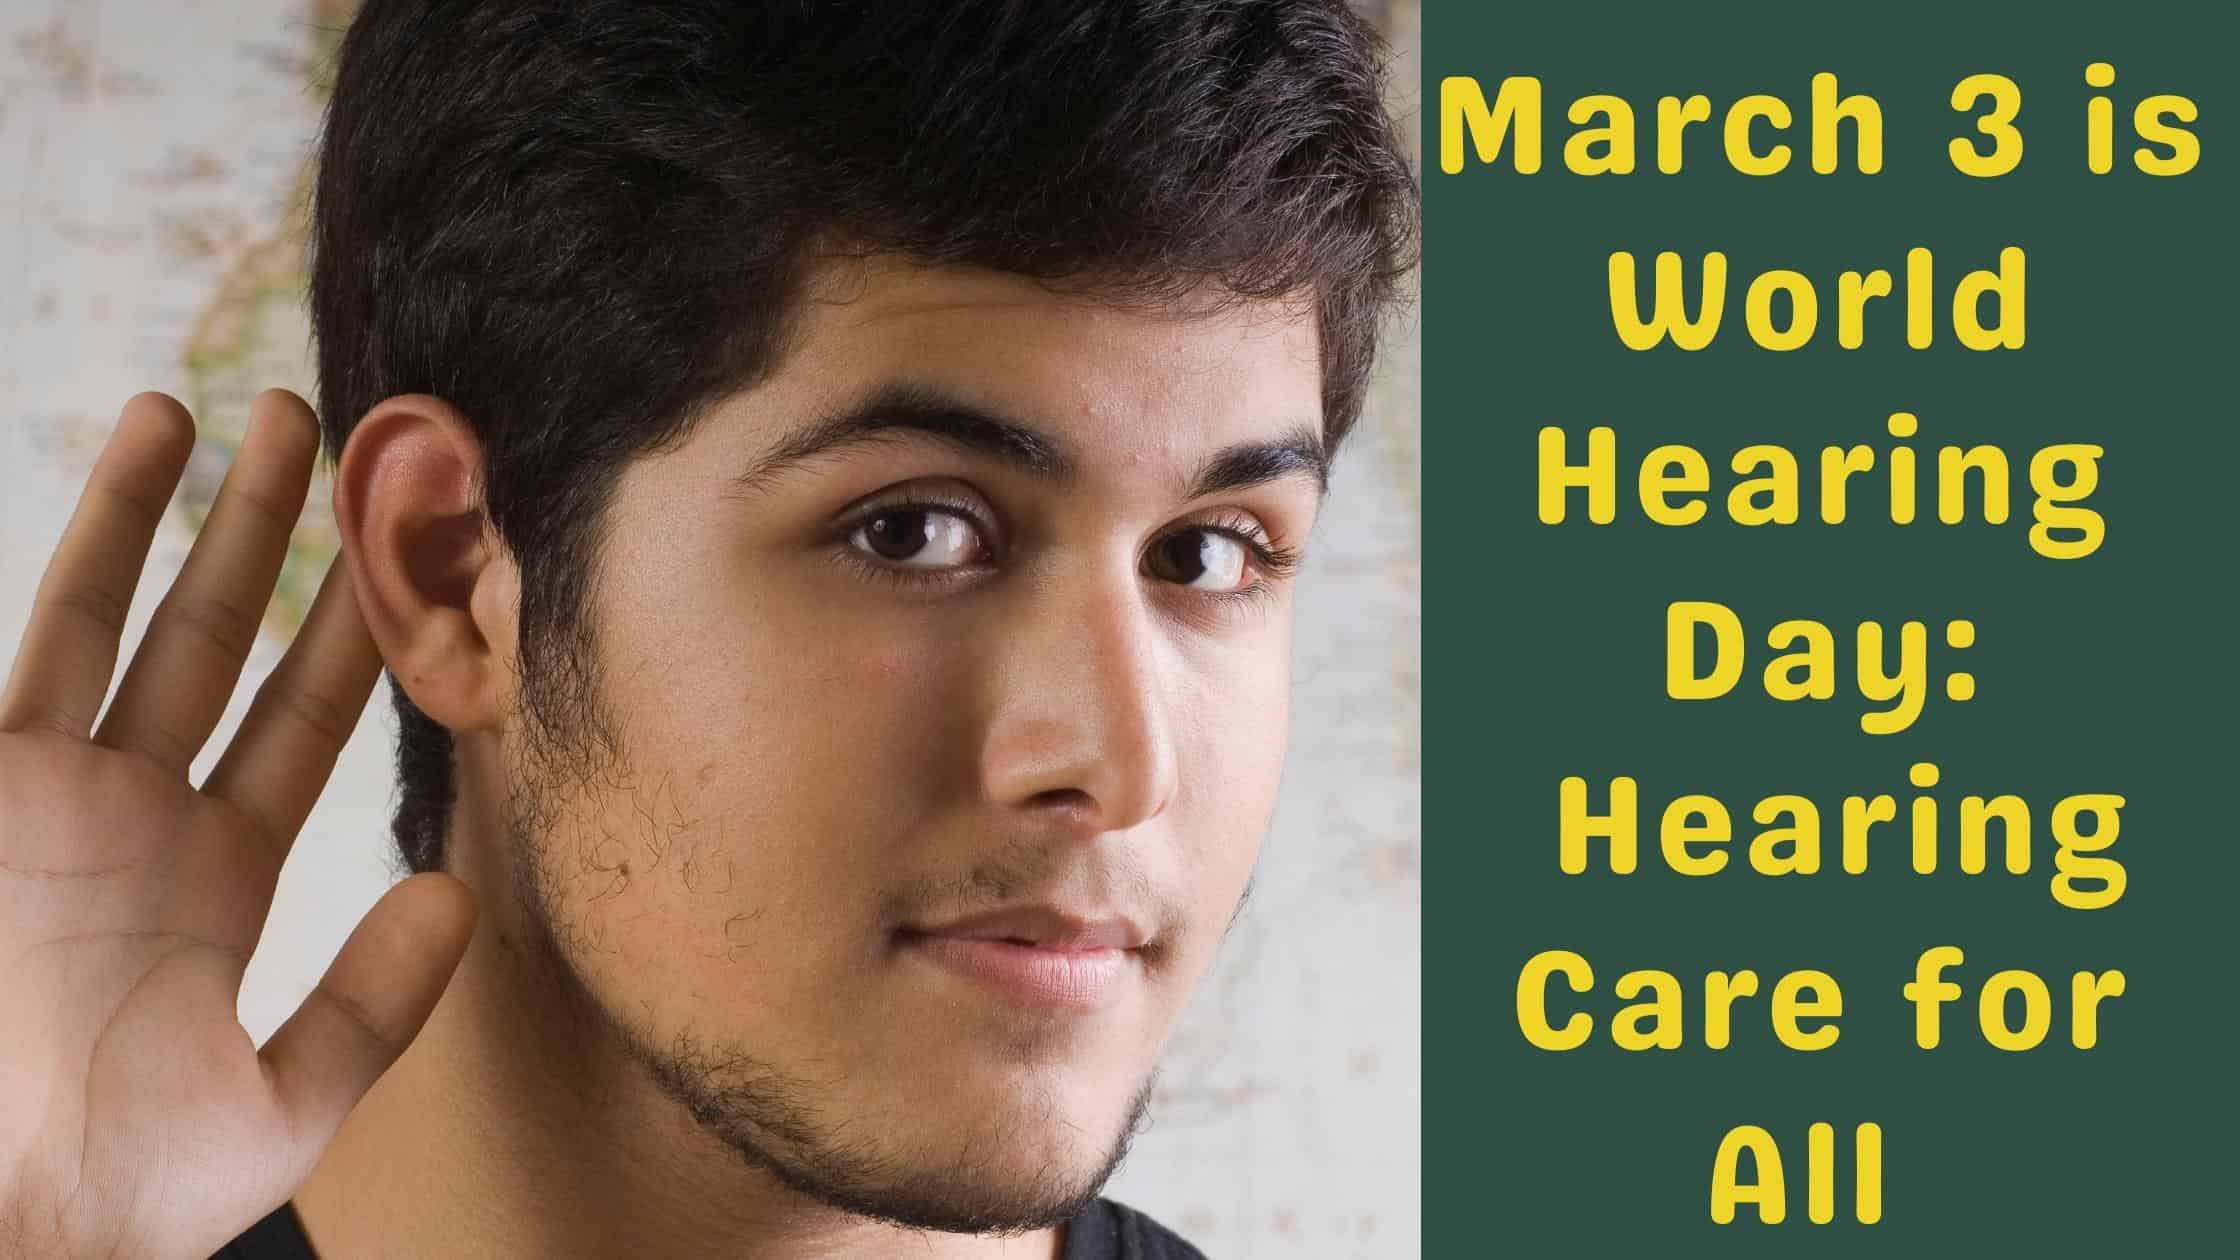 March 3 is World Hearing Day Hearing Care for All(14)